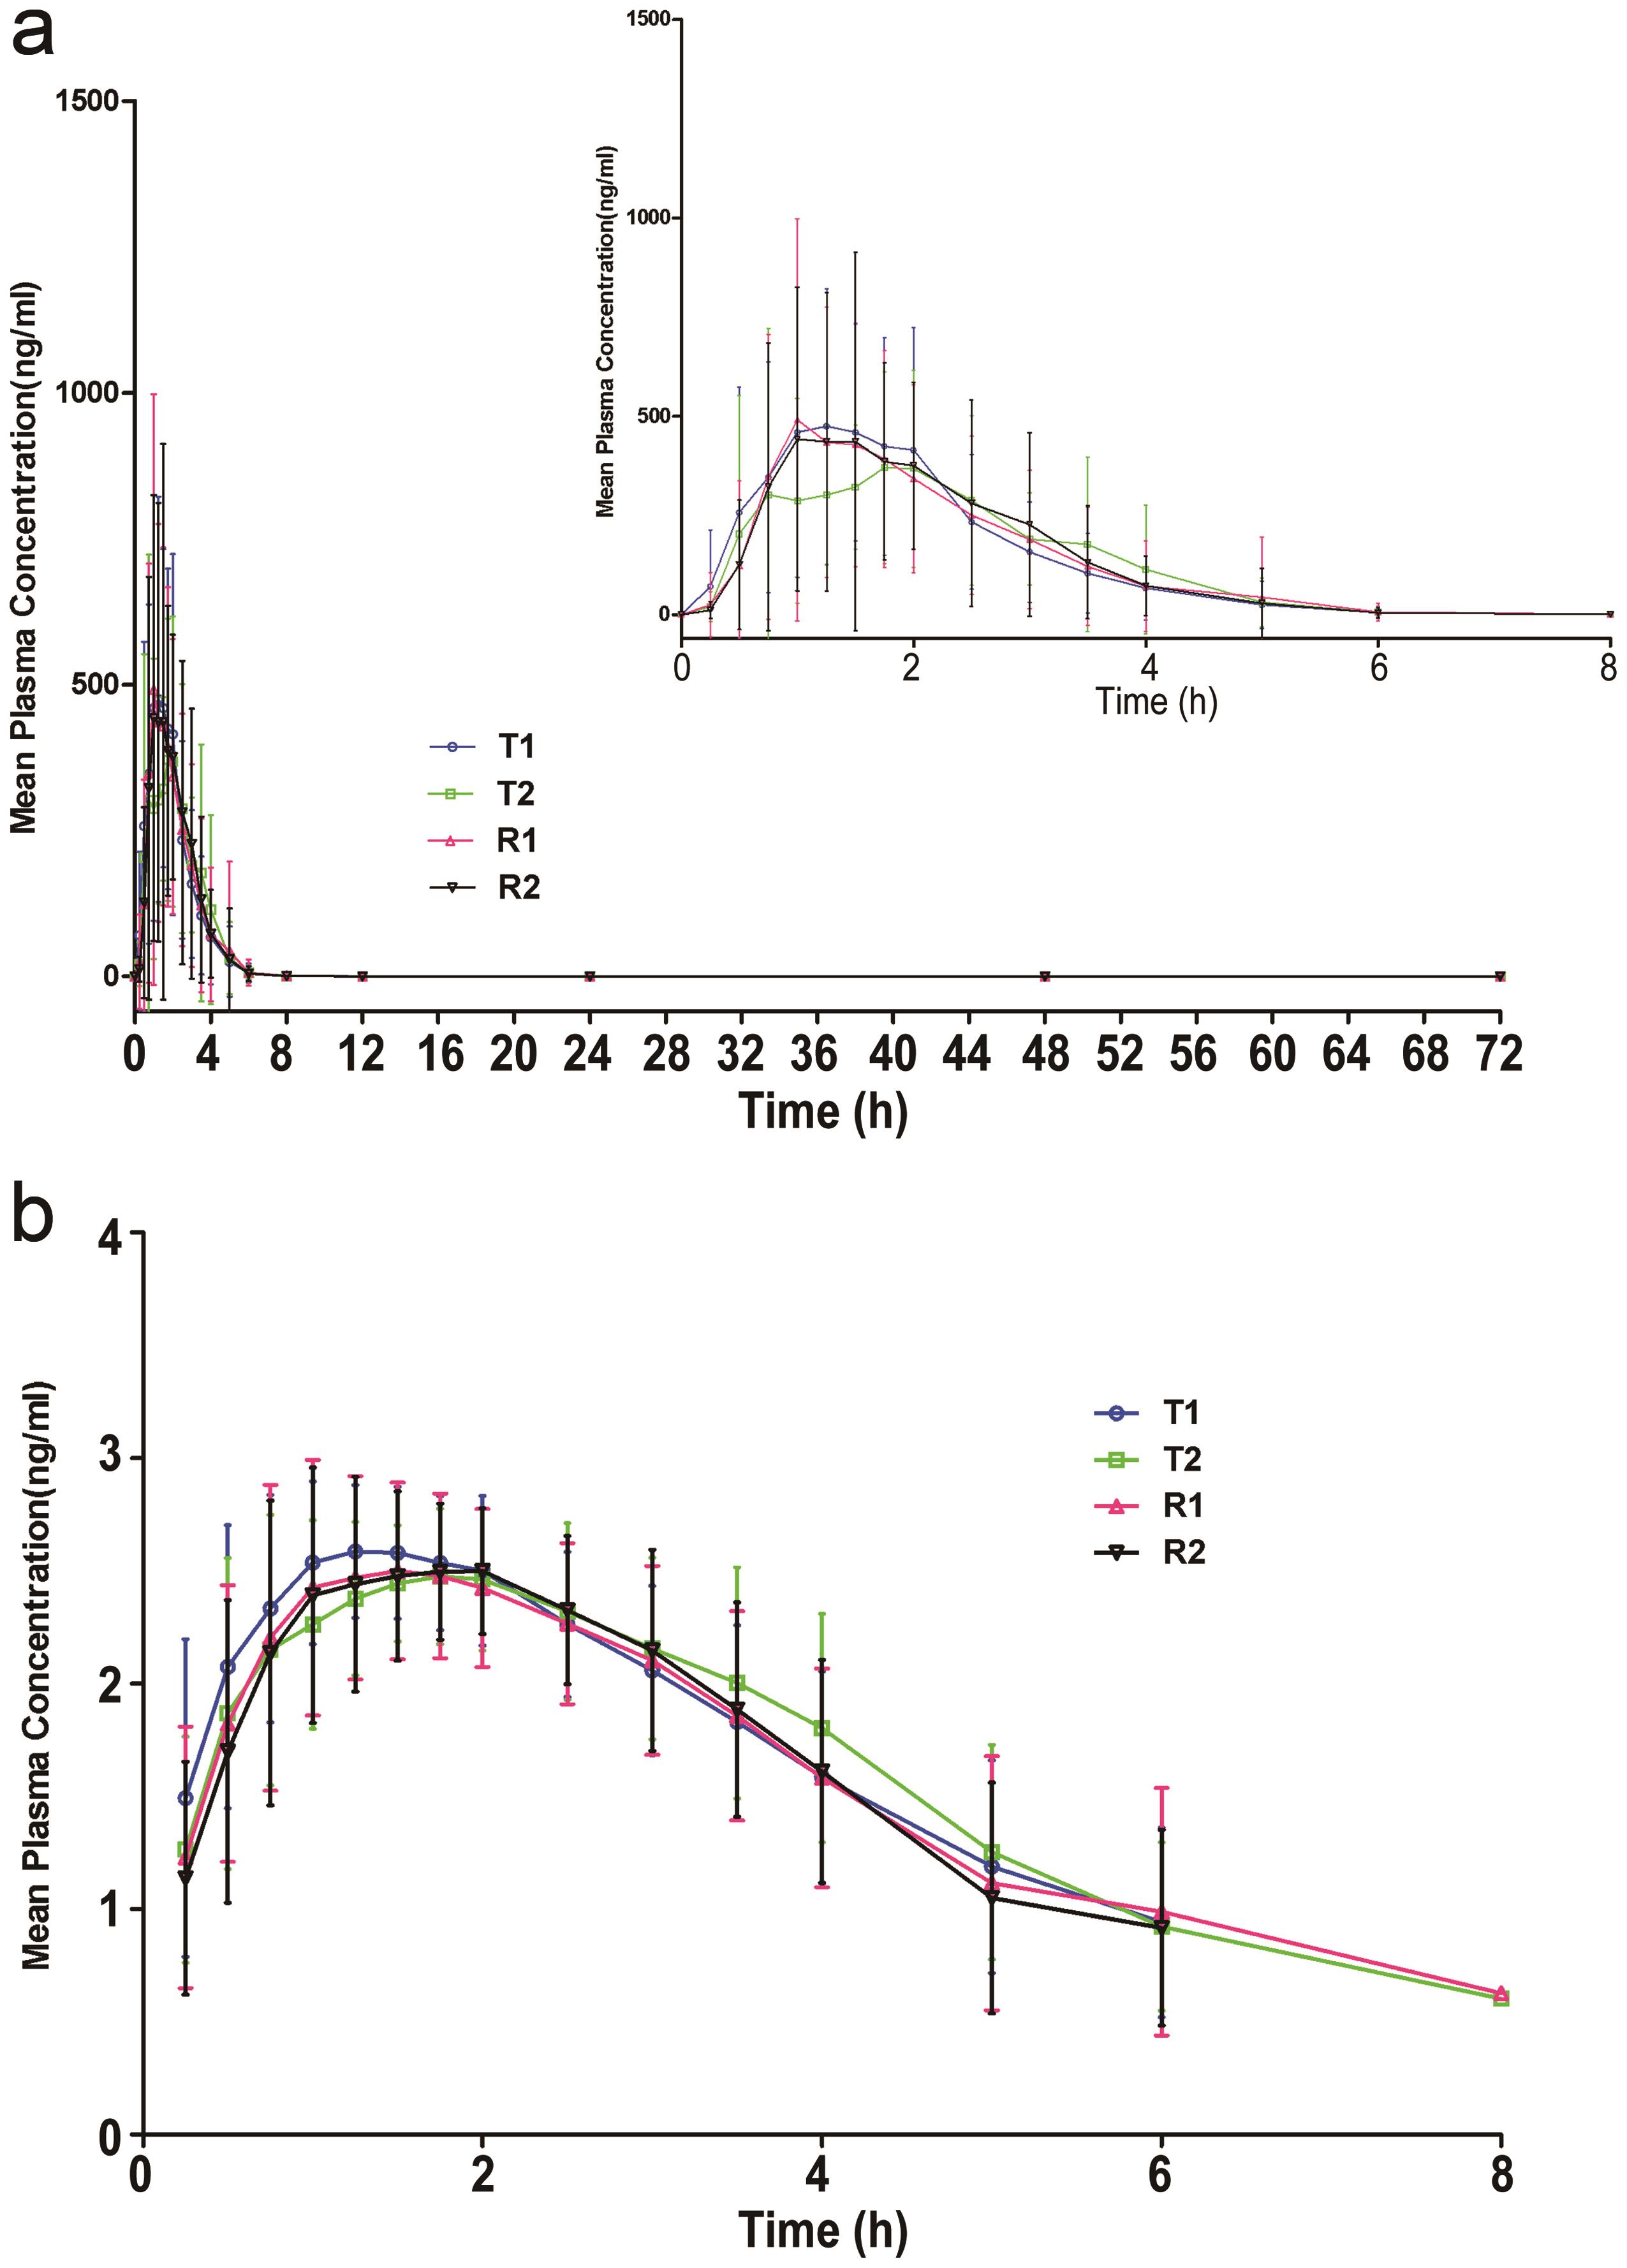 Mean plasma concentration-time curves (a) and semi-logarithmic curves (b) of the generic or test (T) and the brand-named or reference (R) products of sofosbuvir under the fed condition.